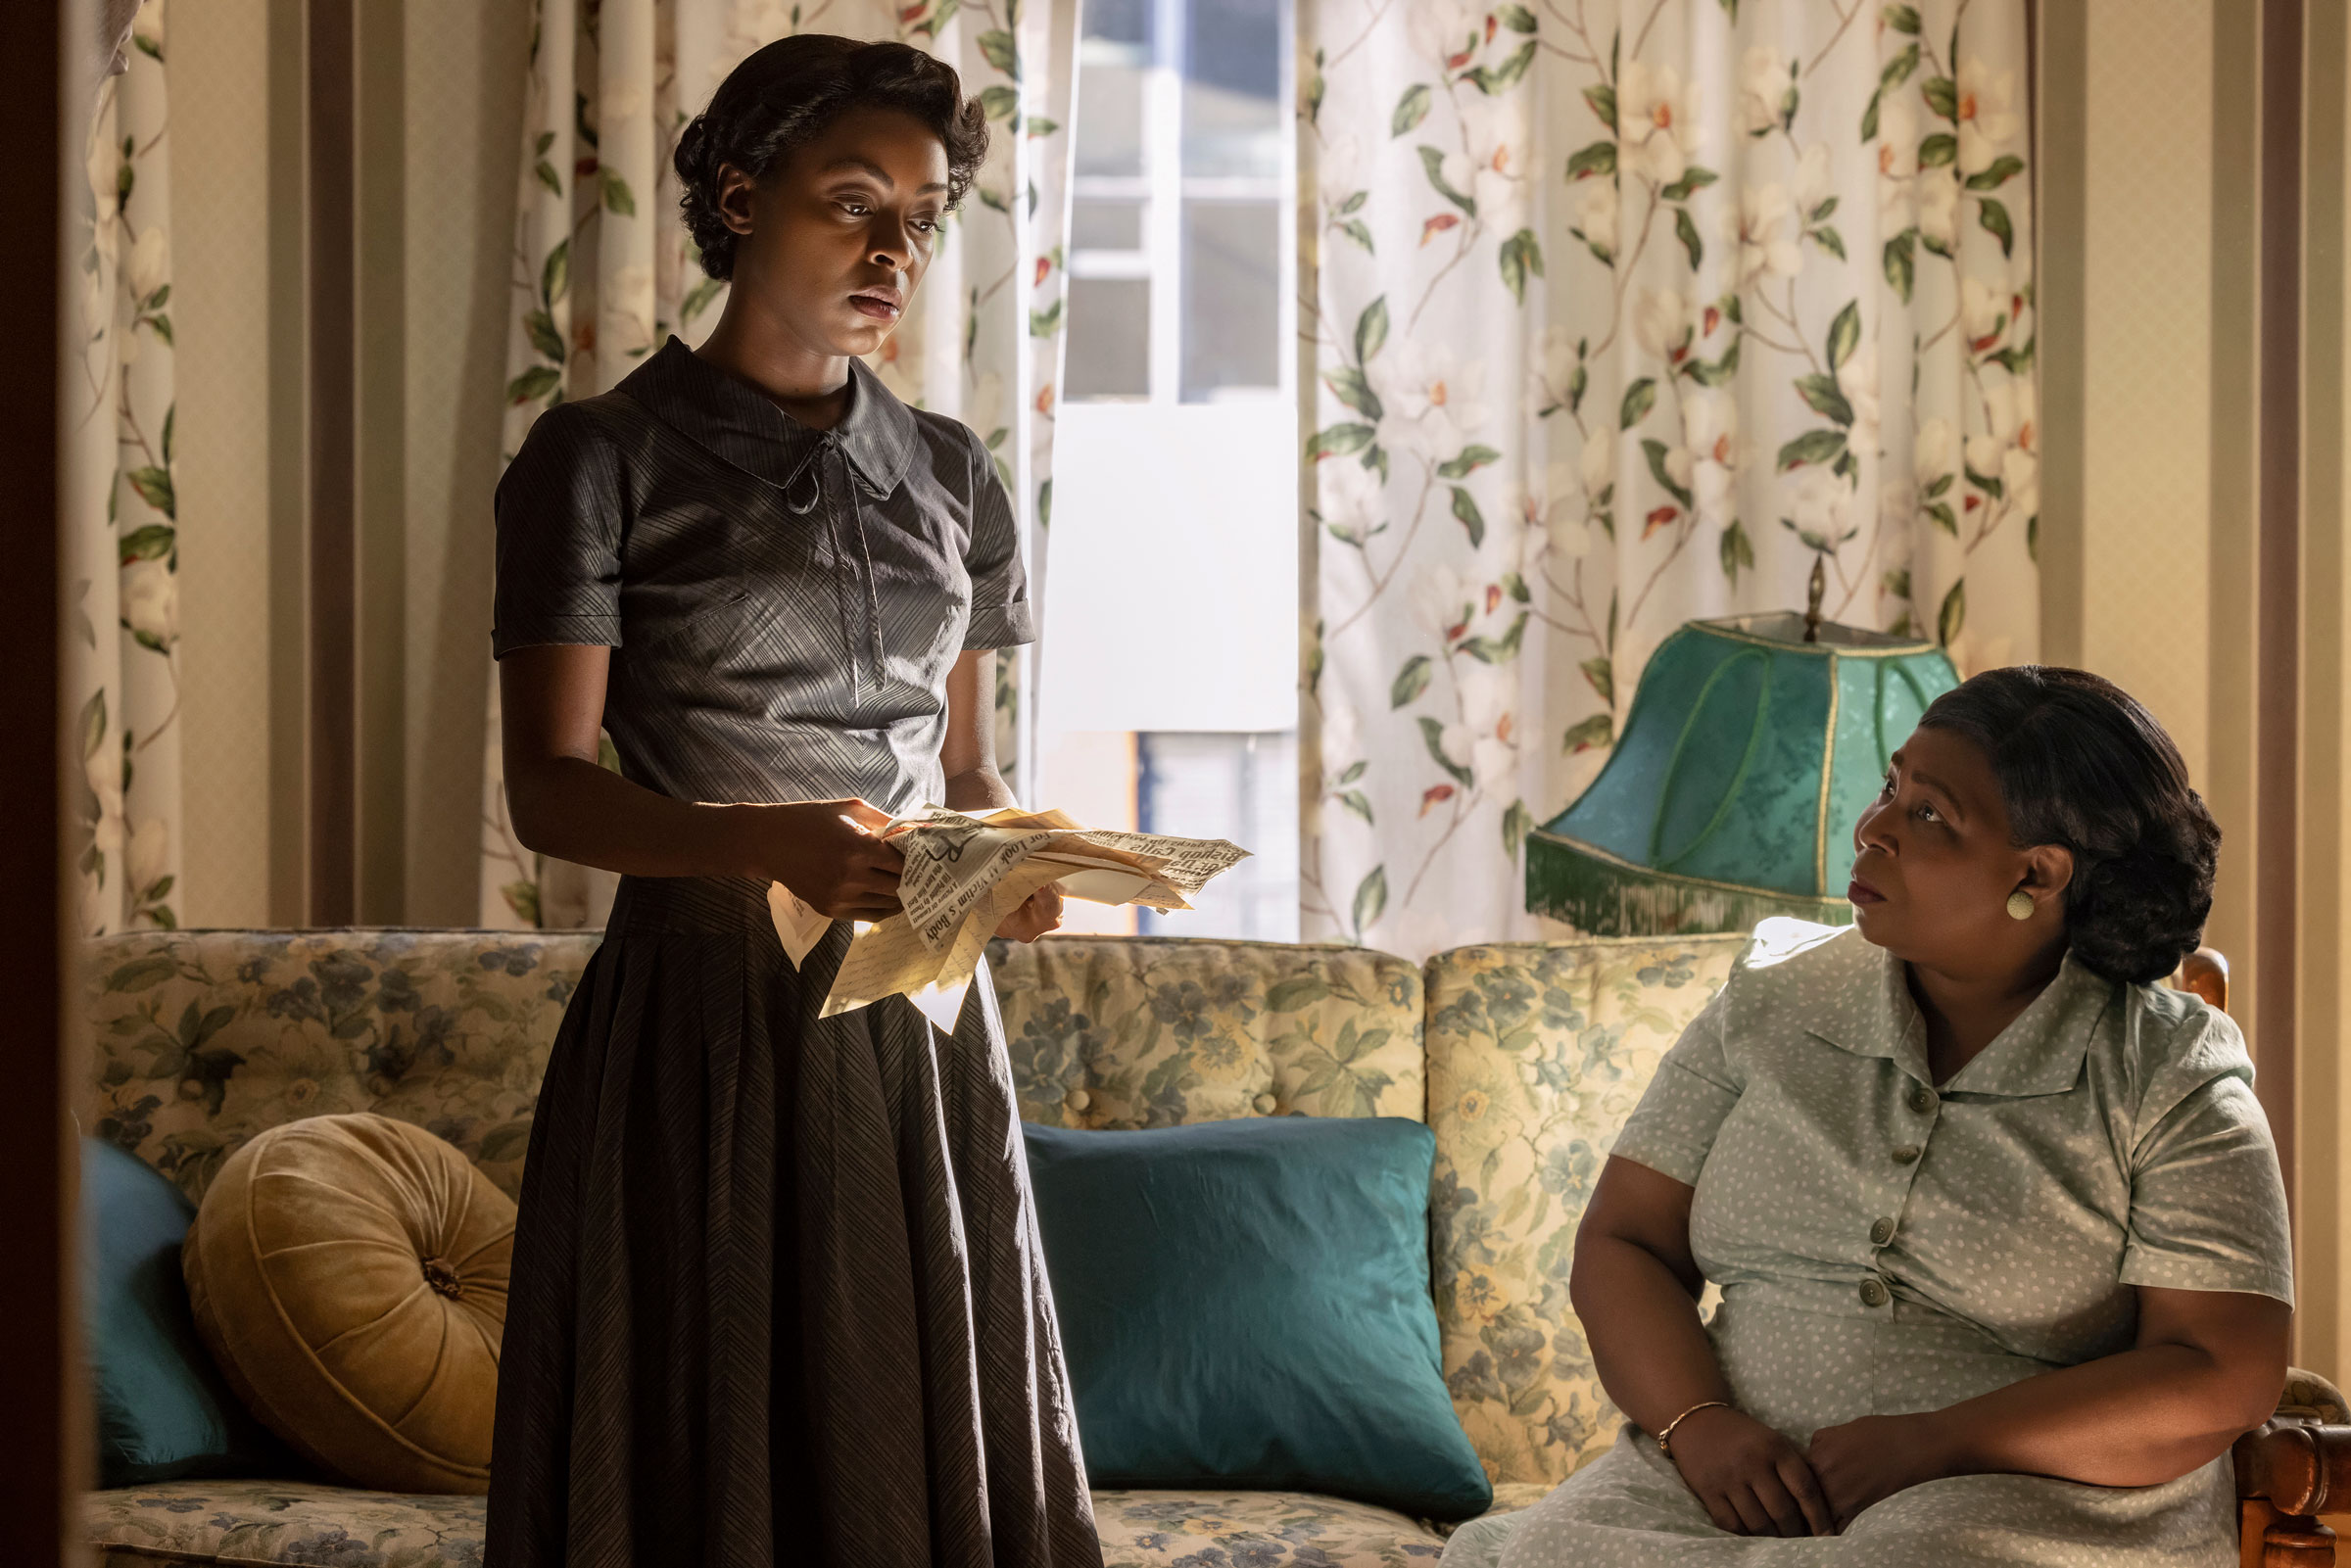 (L to R) Danielle Deadwyler as Mamie Till-Mobley and Whoopi Goldberg as Alma Carthan in TILL, directed by Chinonye Chukwu, released by Orion Pictures. (Lynsey Weatherspoon / Orion Pictures)